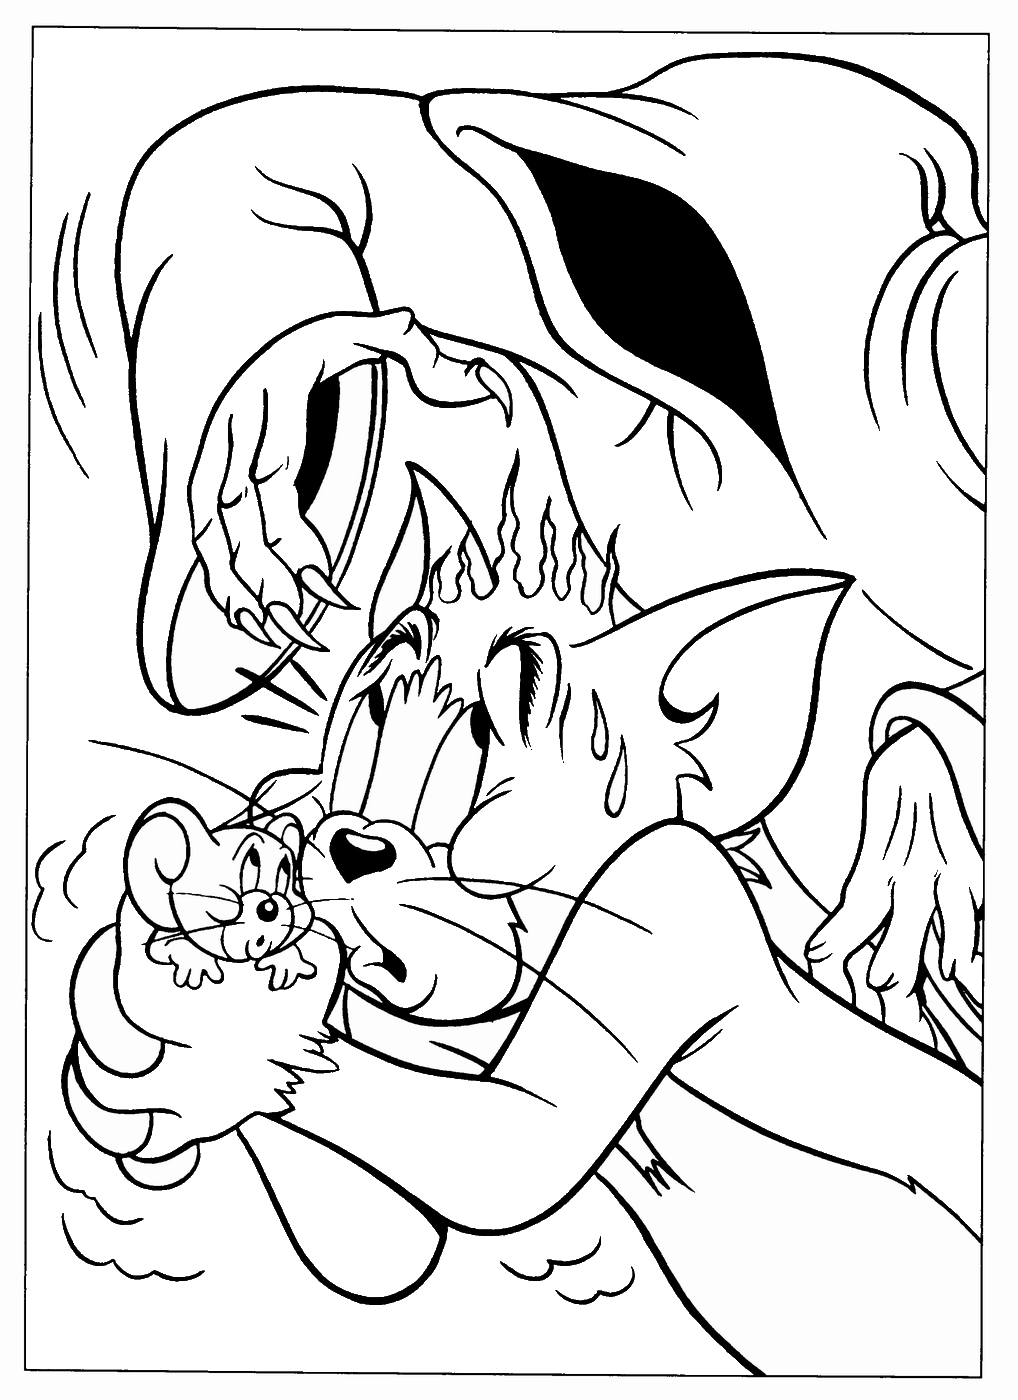 Tom and Jerry Coloring Pages TV Film tom_jerry_cl_23 Printable 2020 10153 Coloring4free